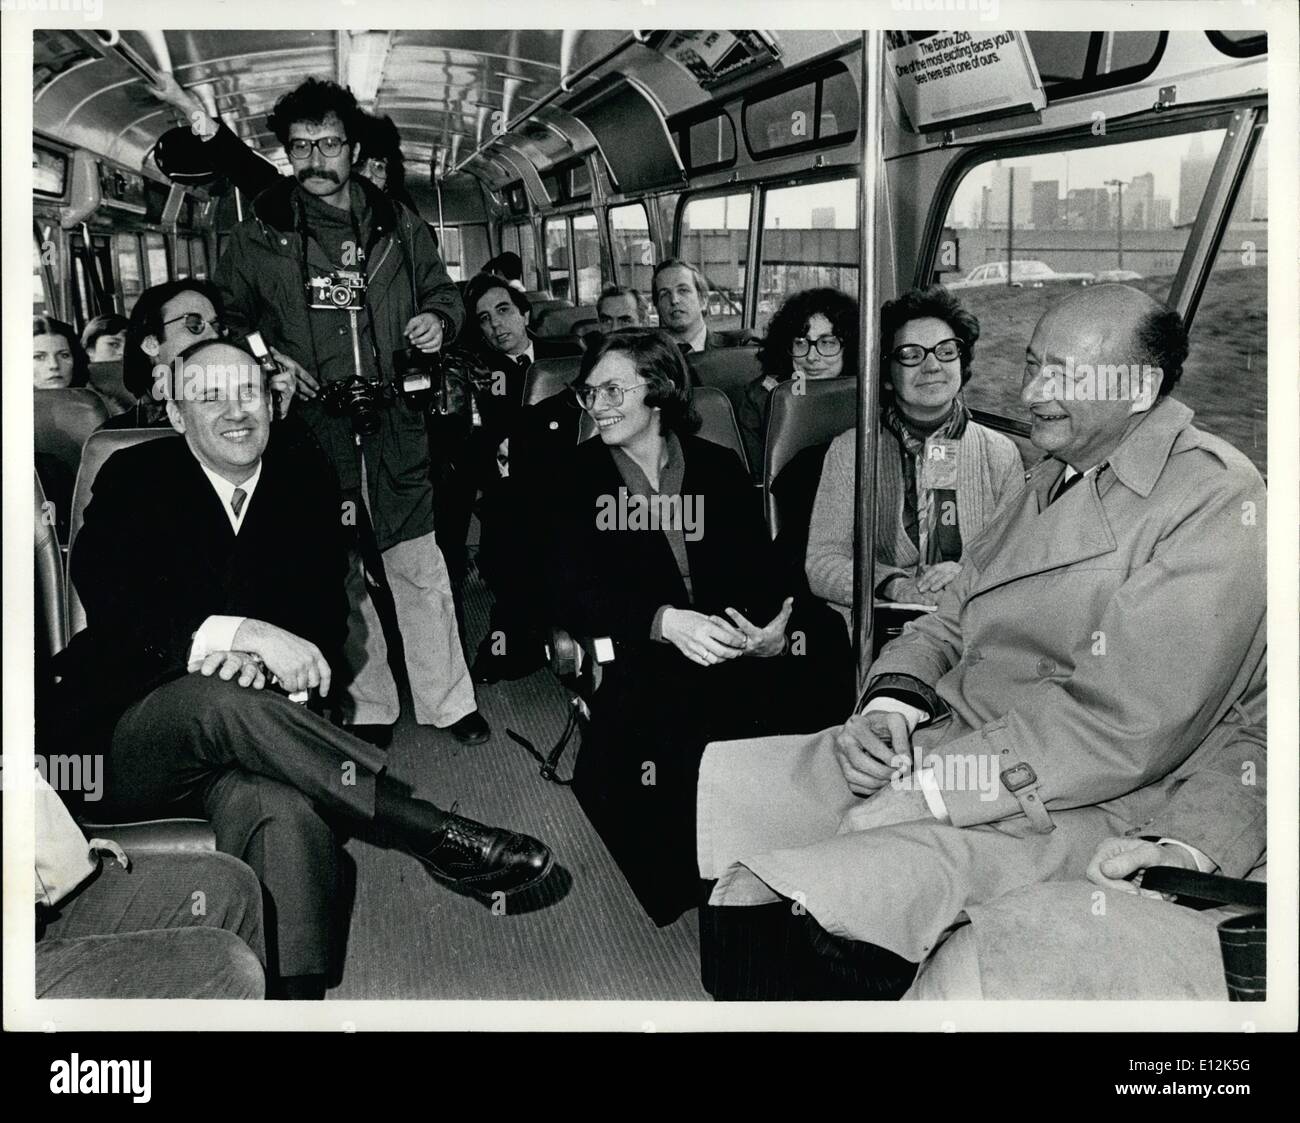 Feb. 24, 2012 - Sunday, Jan. 1st, 1978, New York City After the swearing-in ceremonies of Mayor Edward I. Koch, City Council President Carol Bellamy and Comptroller Harrison J. Goldin, the newly elected officials traveled to the five borough receptions in the press bus. Left to right: Comptroller Harrison J. Goldin, City Council President Carol Bellamy and Mayor Edward I. Koch. Stock Photo